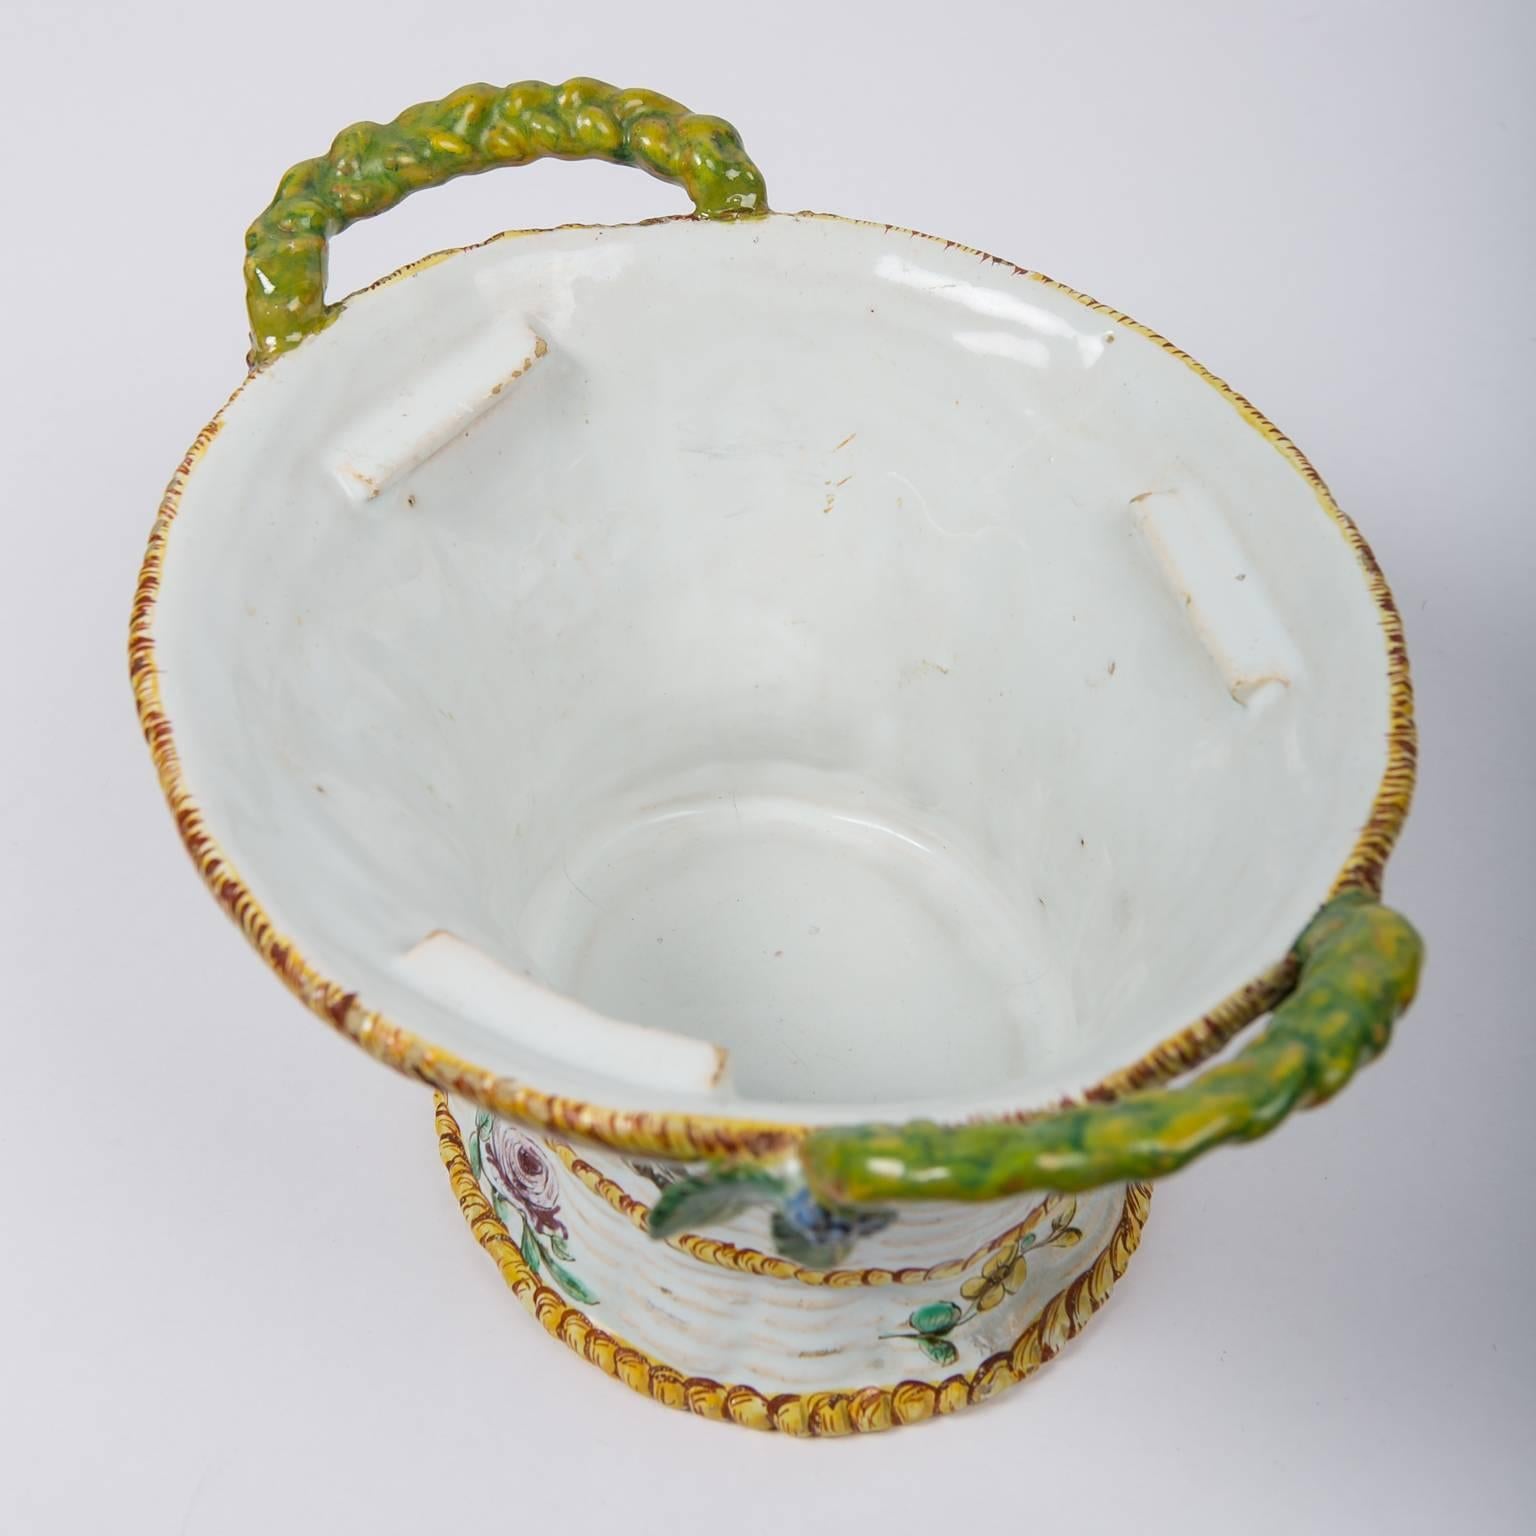 French Faience Planter or Bough Pot Made in France circa 1820